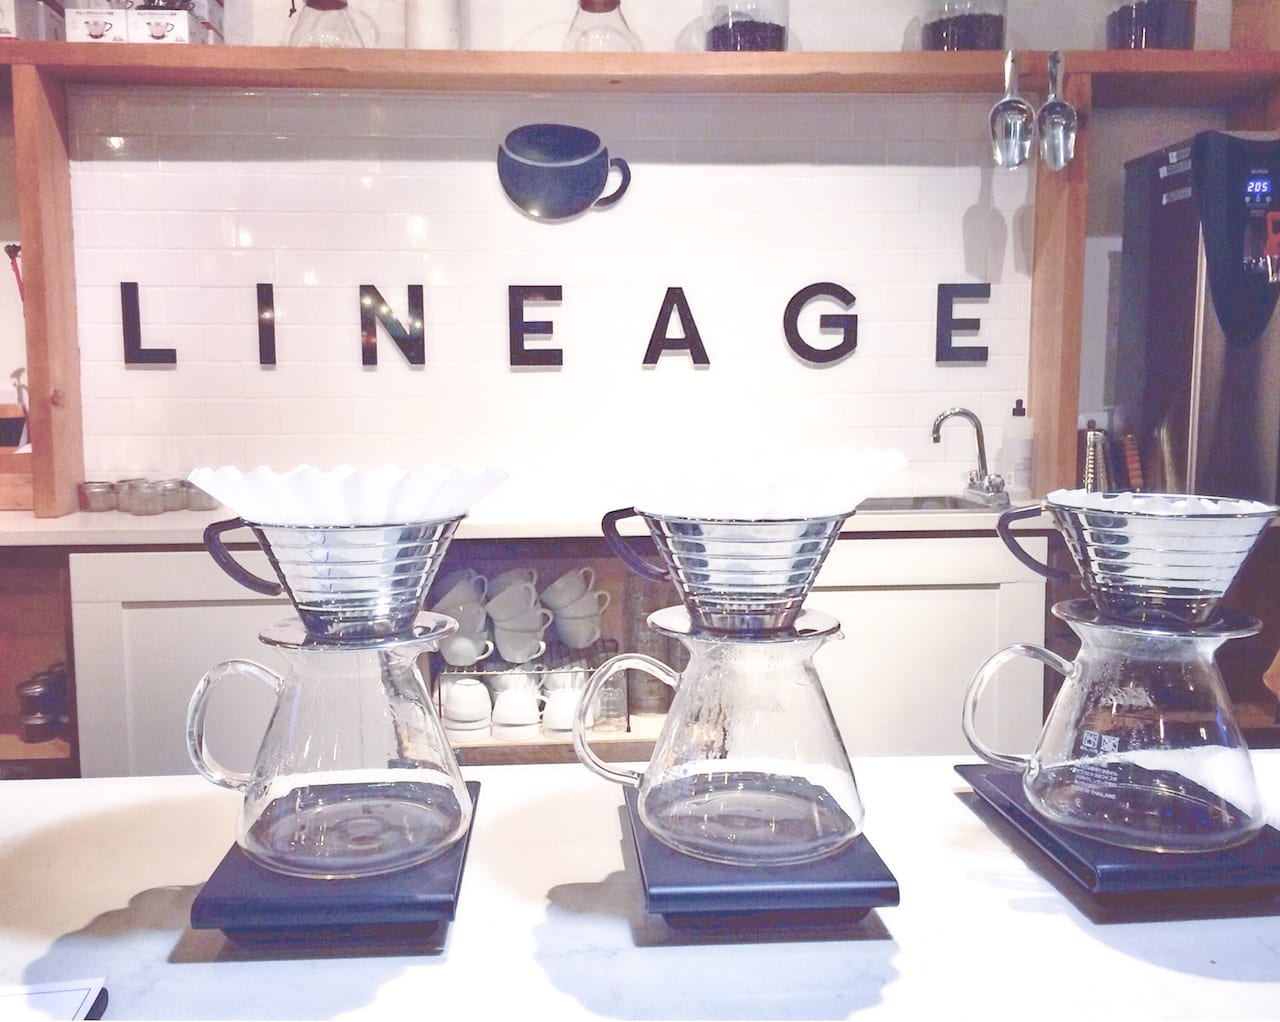 Interview: Founders of Lineage Coffee in Orlando, FL